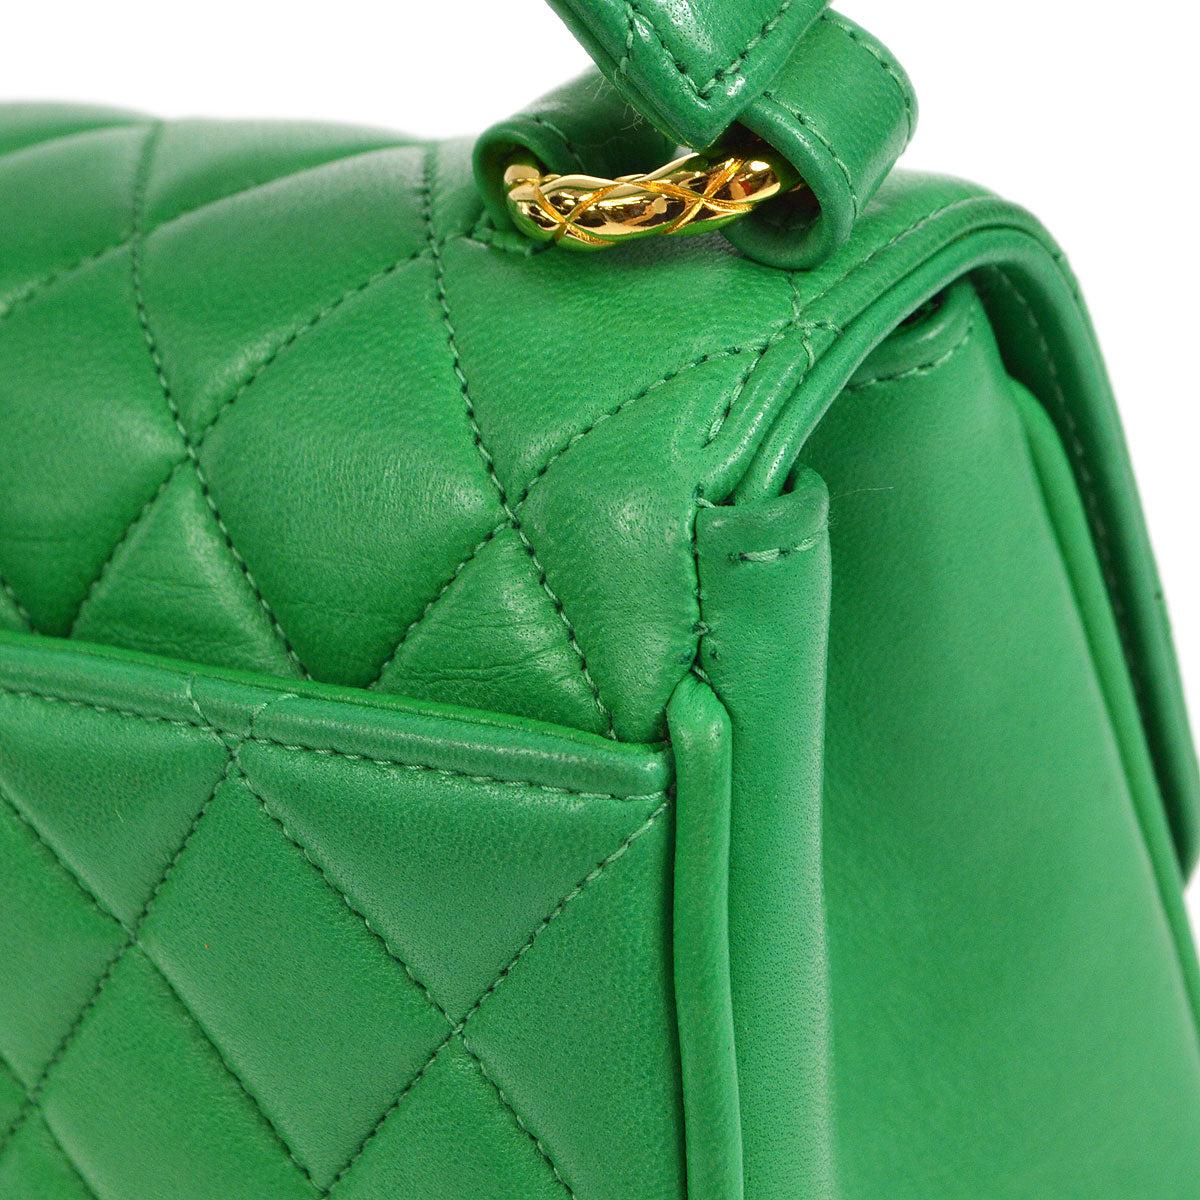 Women's CHANEL Emerald Green Lambskin Leather Gold Small Top Handle Evening Flap Bag